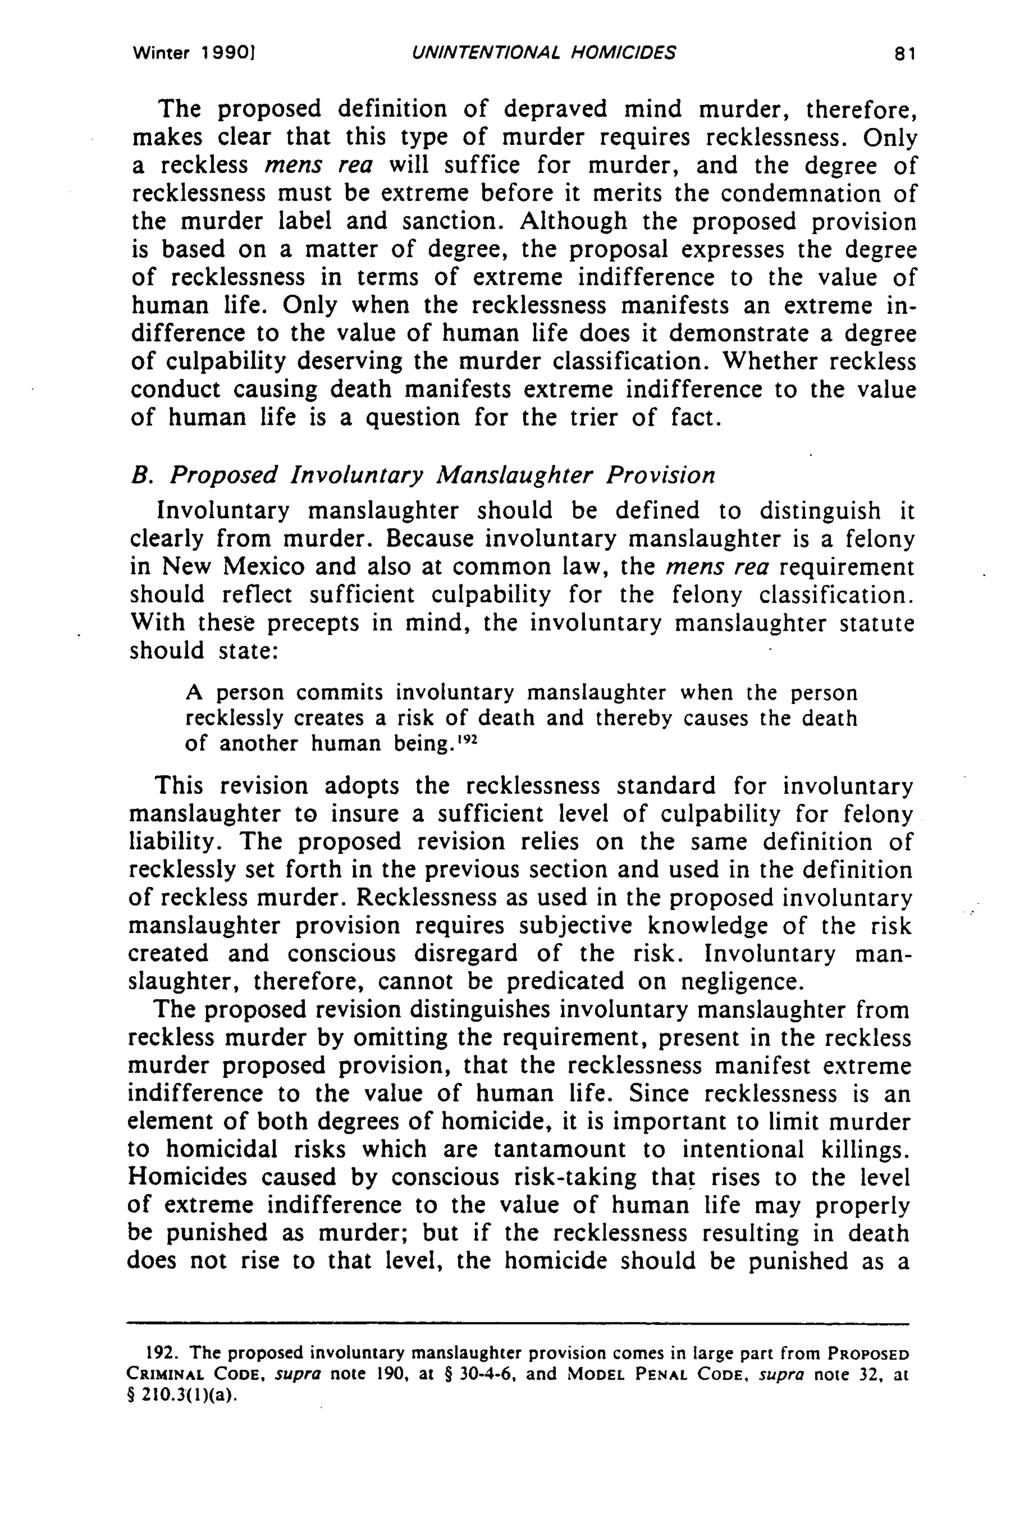 Winter 19901 UNINTENTIONAL HOMICIDES The proposed definition of depraved mind murder, therefore, makes clear that this type of murder requires recklessness.